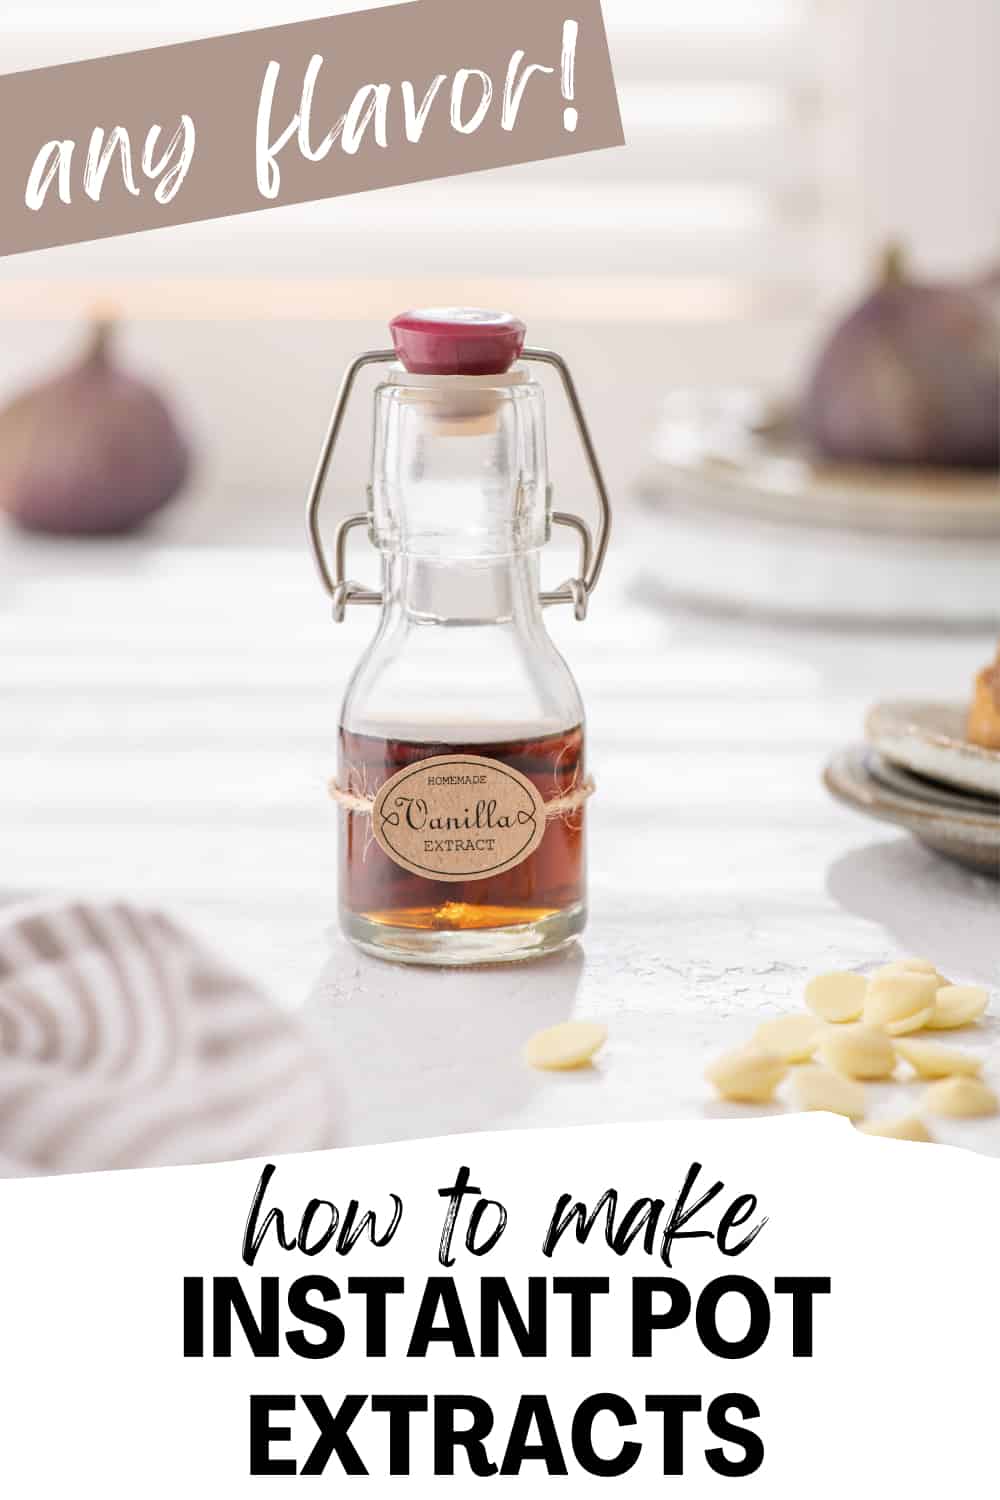 How To Make Instant Pot Extracts